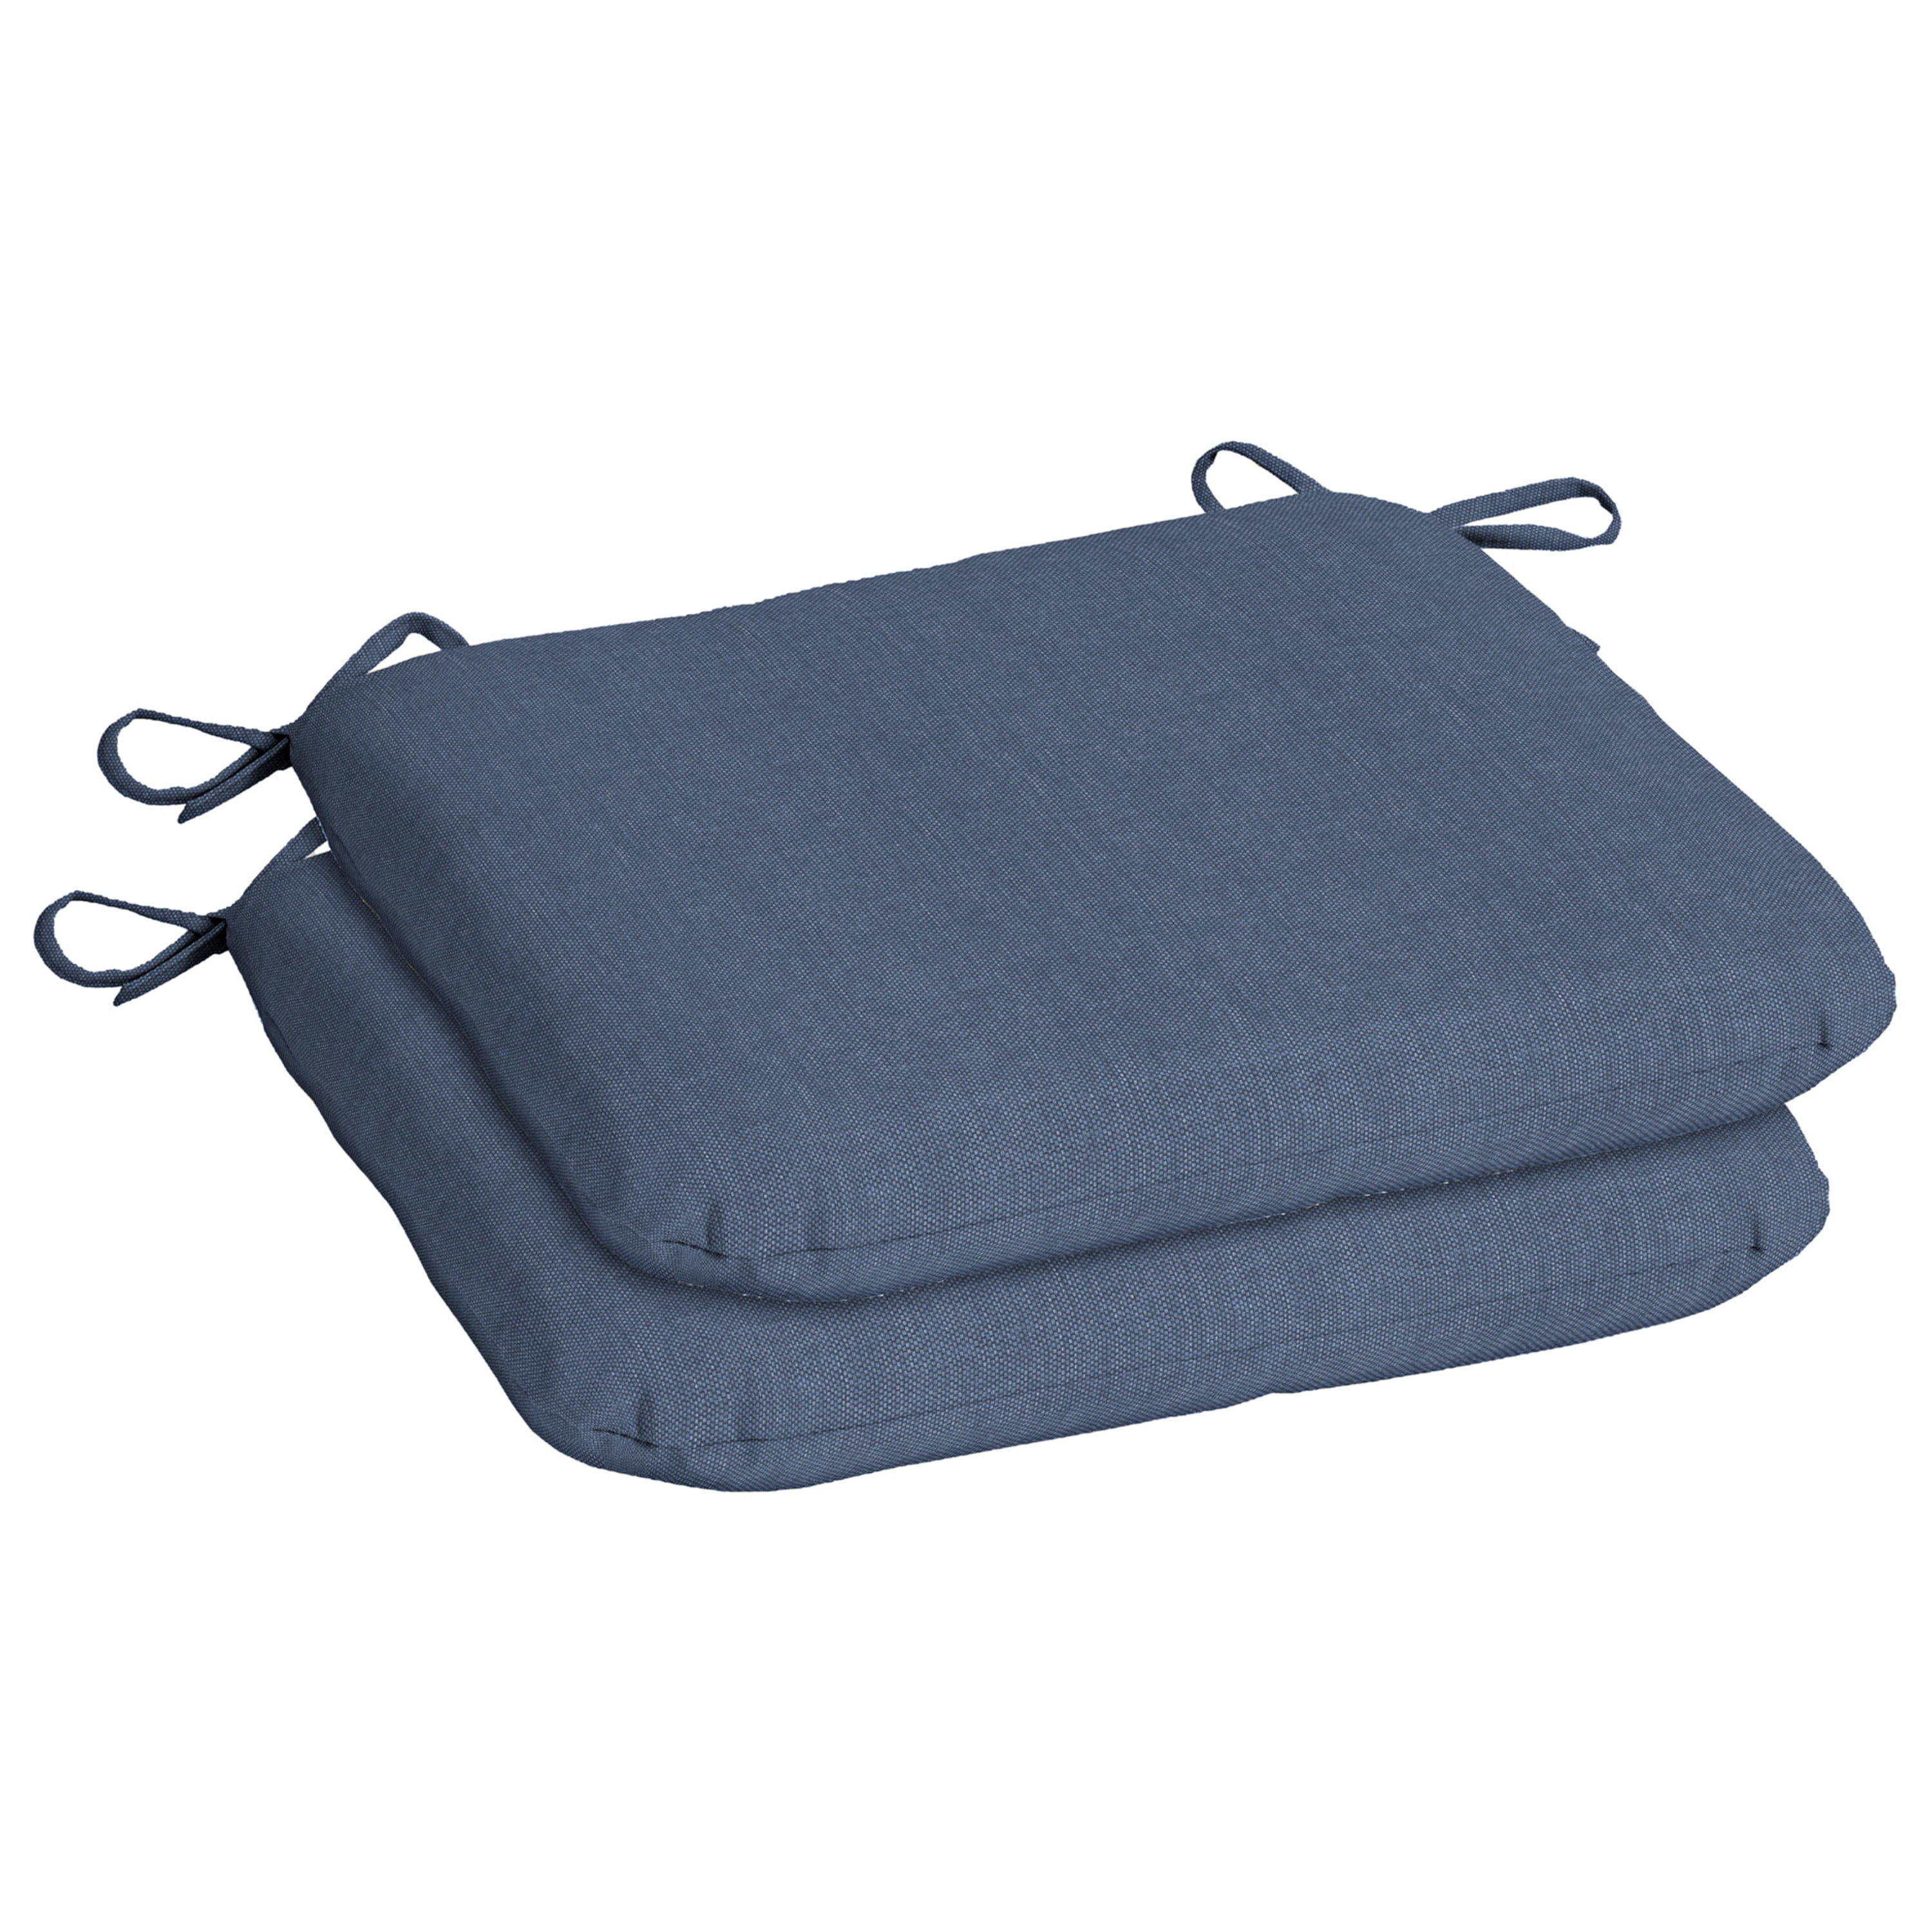 JOYSIDE 16 in. x 17 in. U-Shape Outdoor Chair Cushions Patio Seat Cushions  Seat Pad with Ties Navy Textured (4-Pack) JS-SC-V03W - The Home Depot